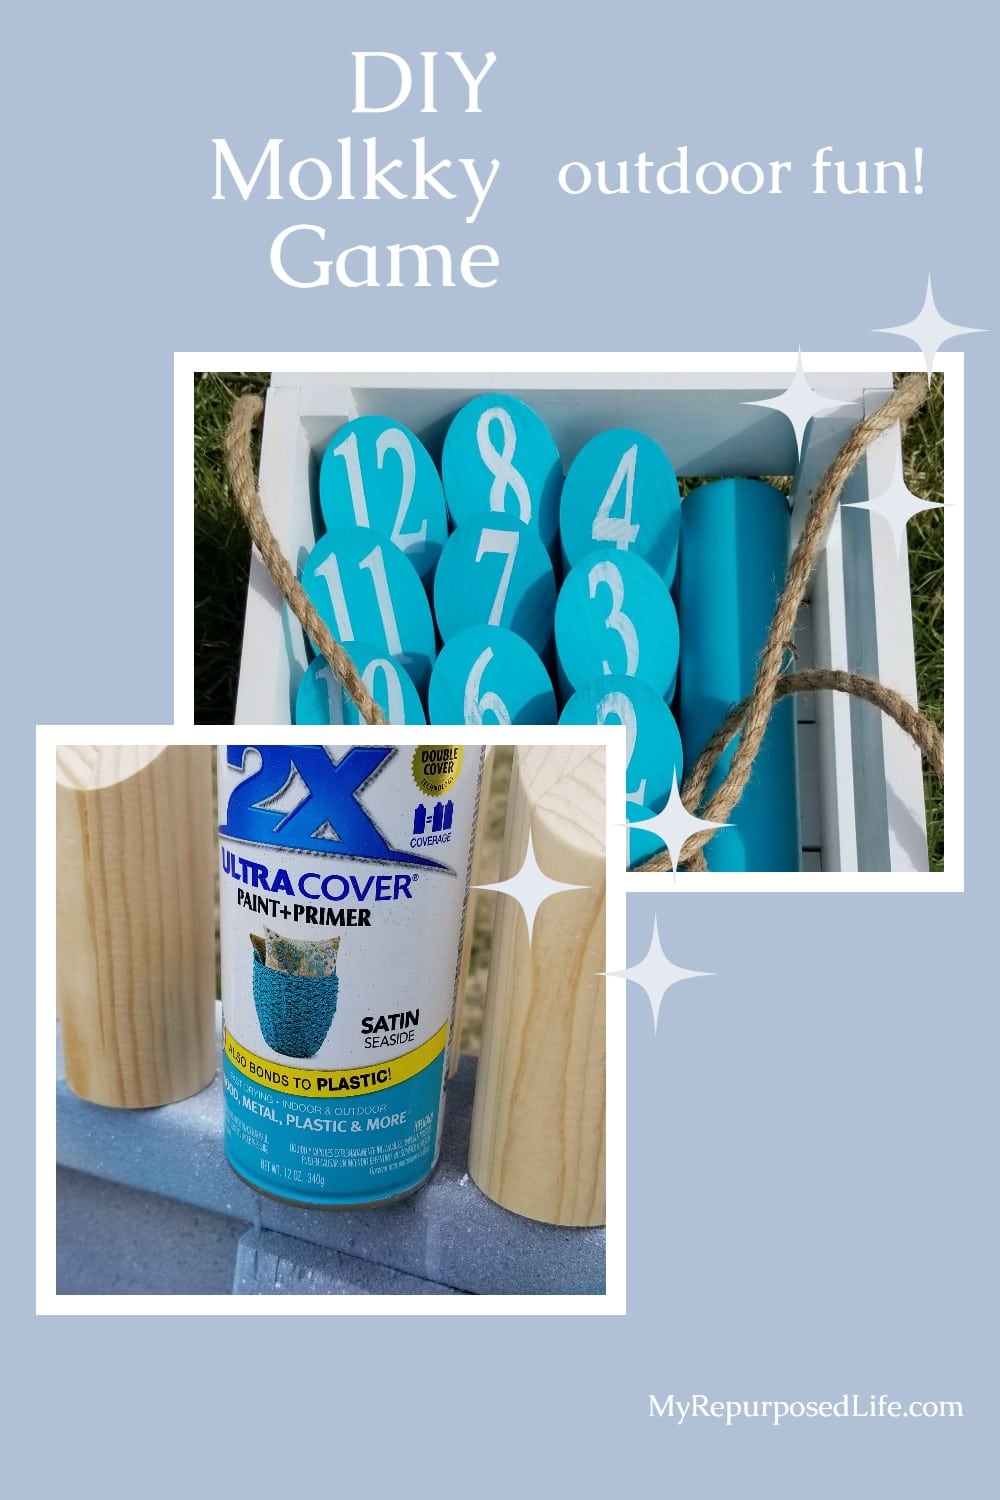 How to make a DIY Molkky game for outdoor fun in the backyard or even while camping. This fun lawn game is easy and inexpensive to make. #MyRepurposedLife #diy #game via @repurposedlife